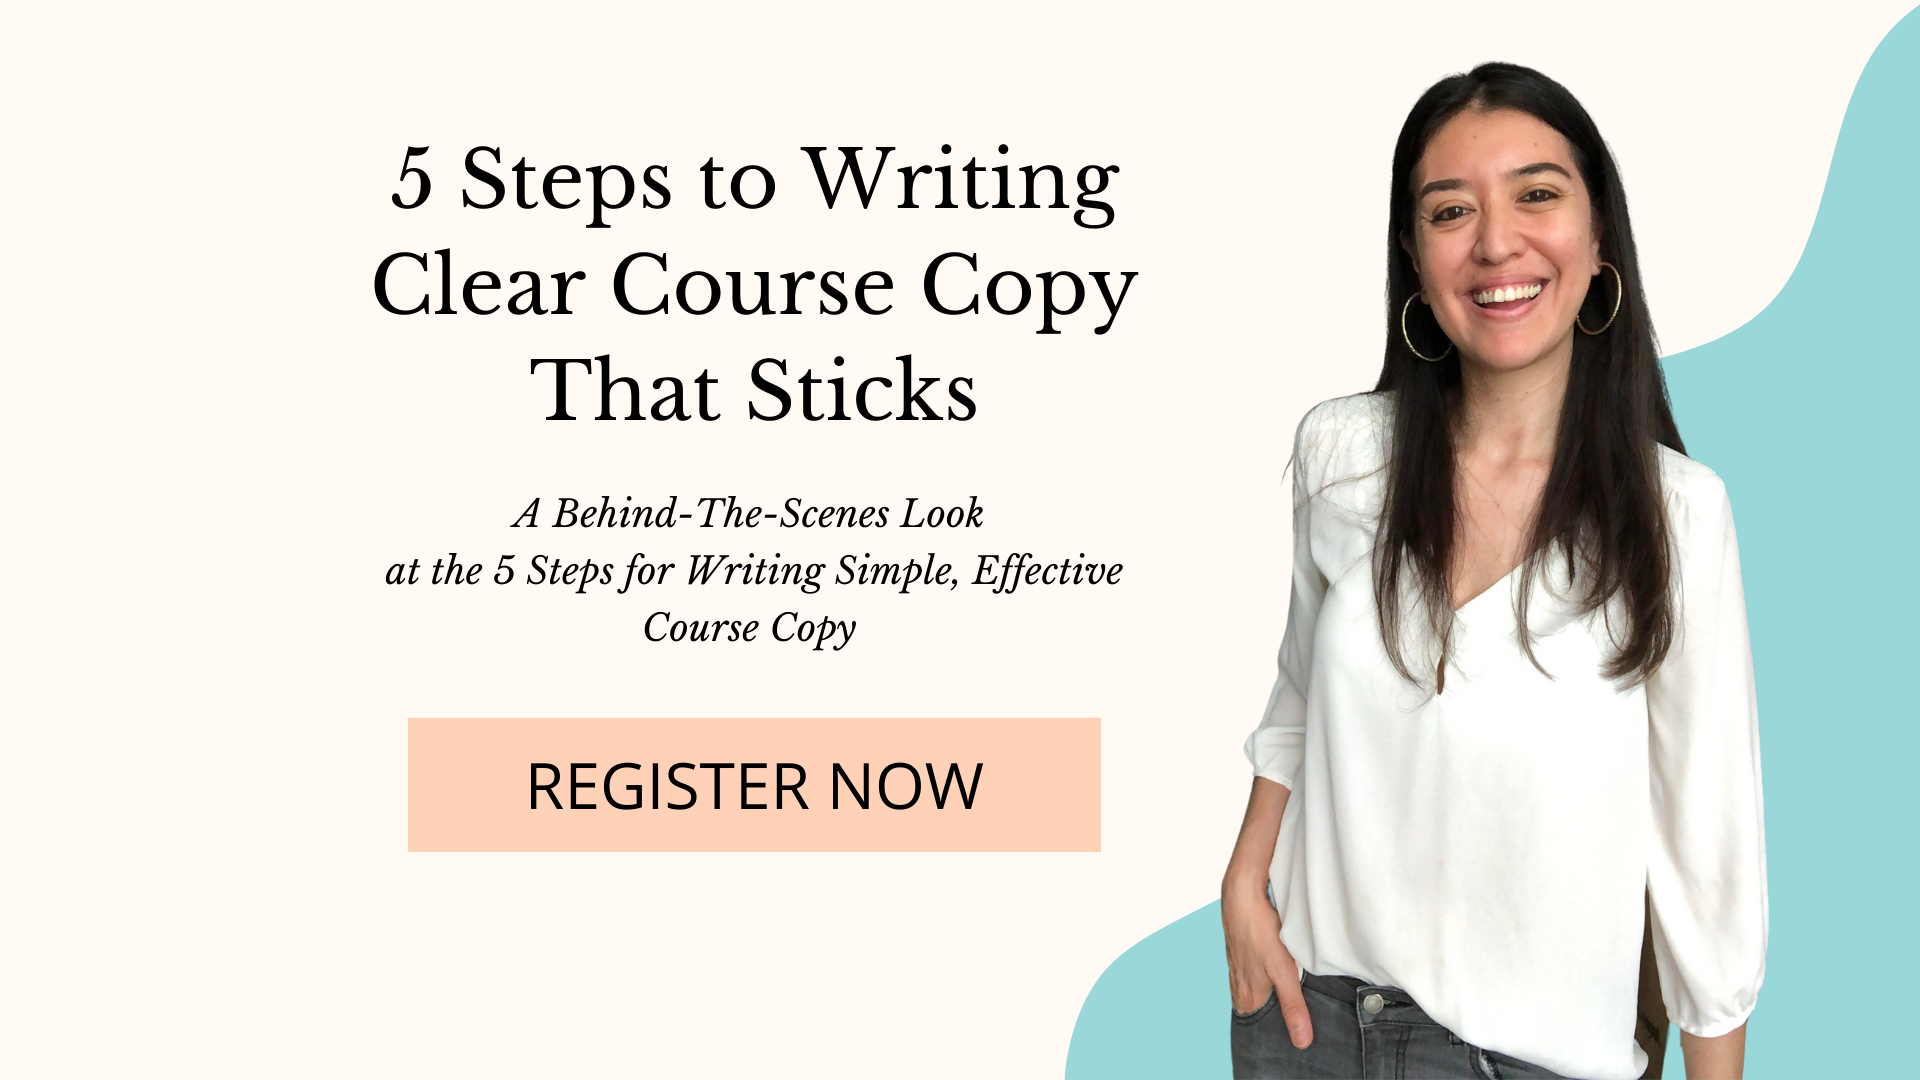 5 Steps to Writing Clear Course Copy That Sticks